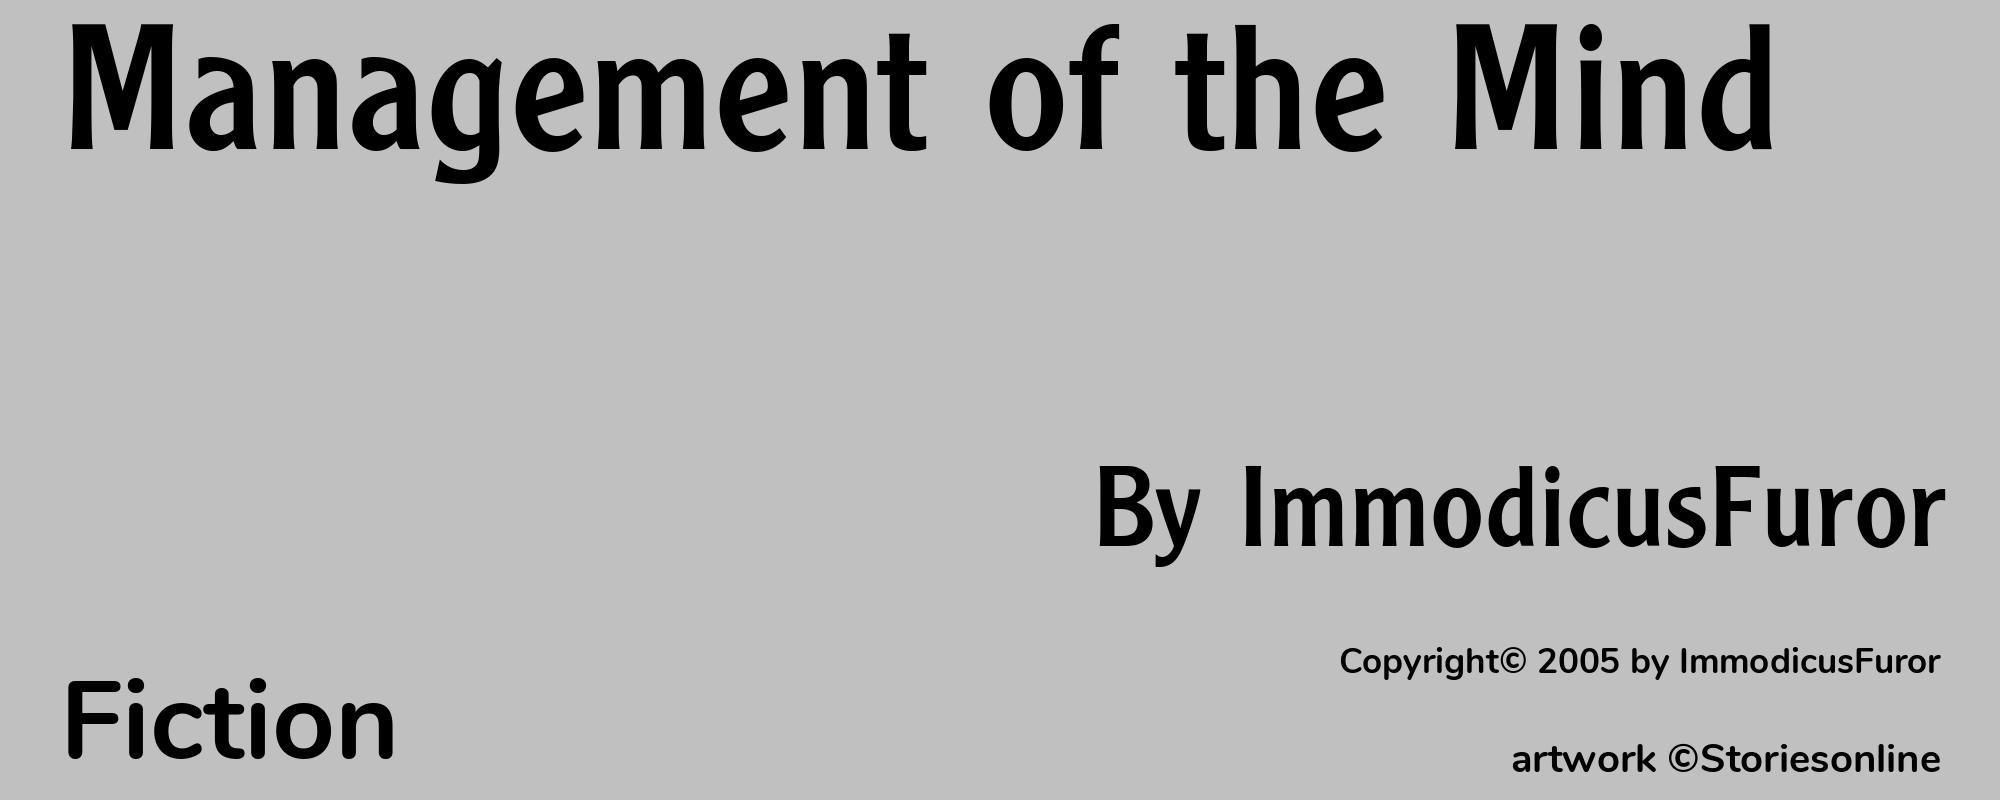 Management of the Mind - Cover